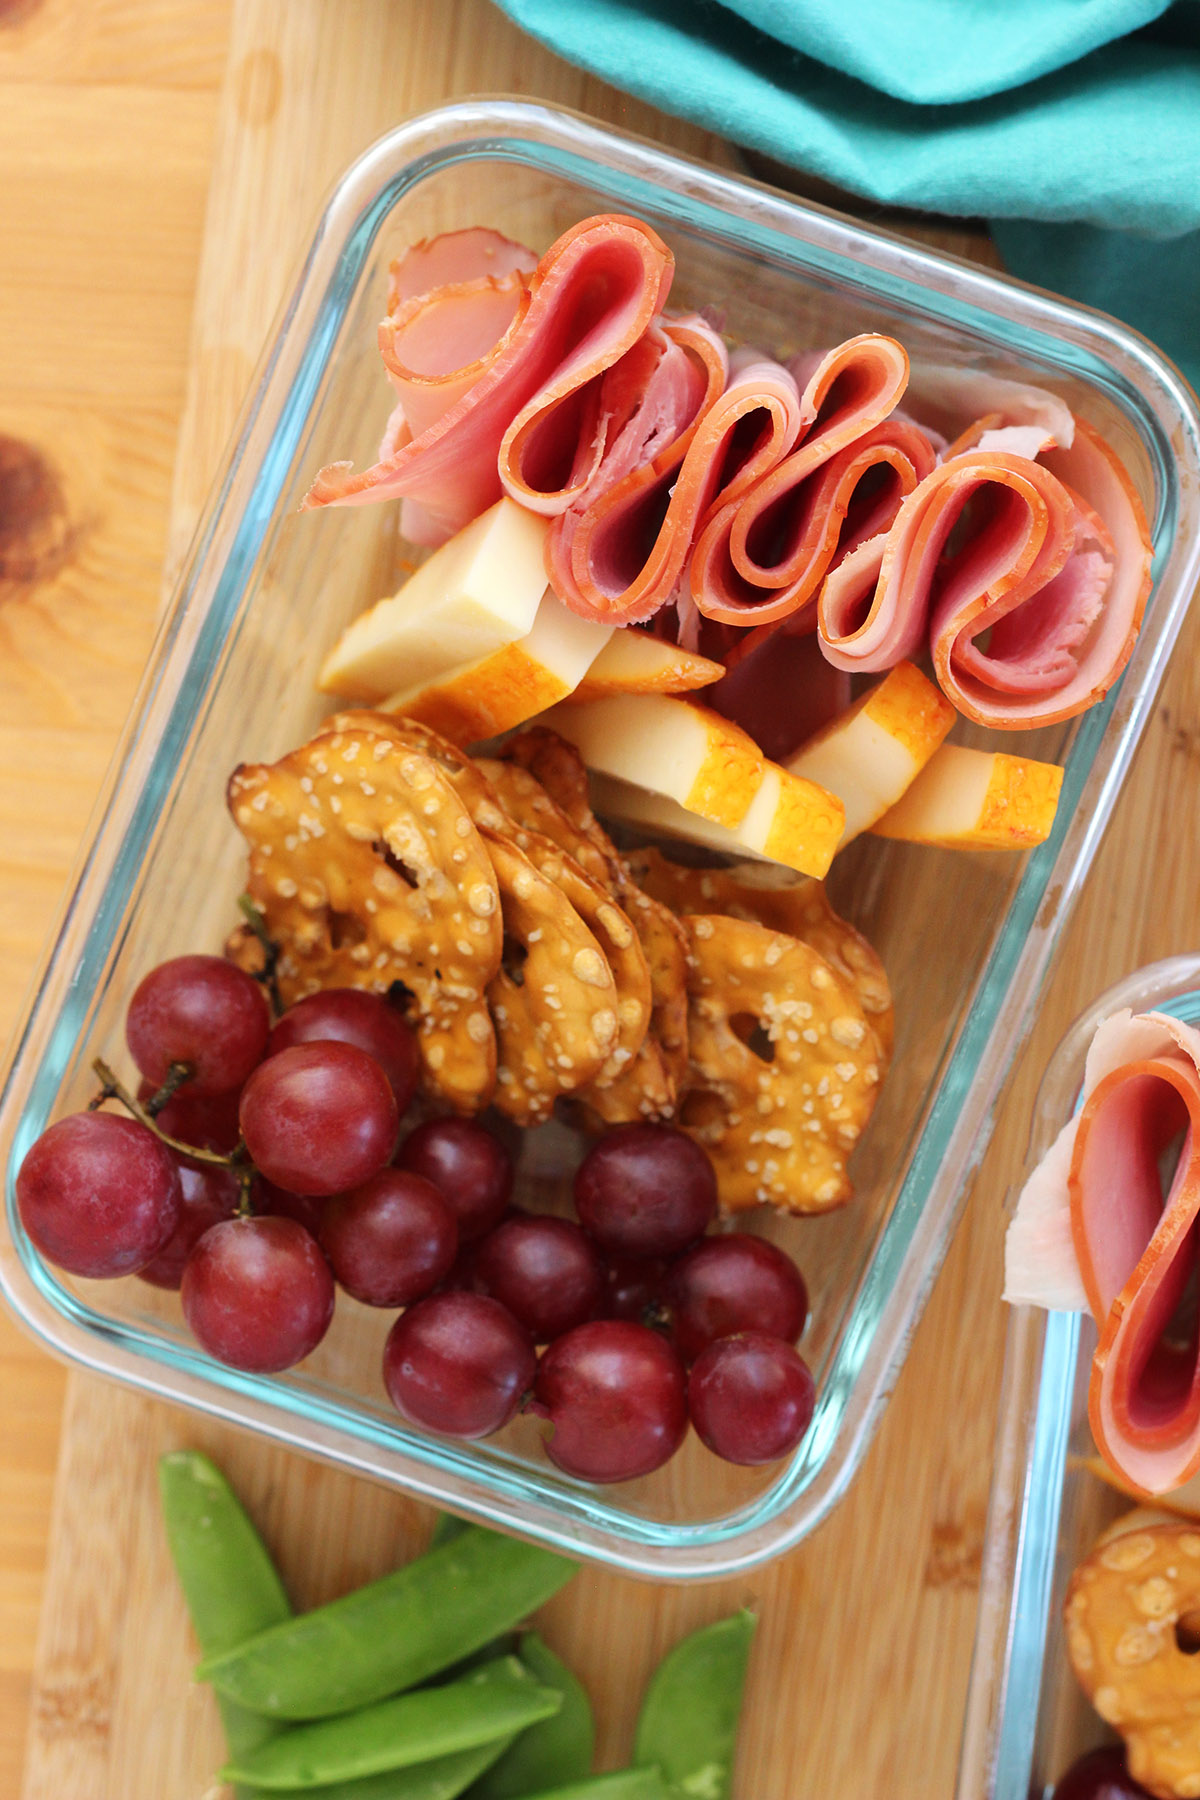 https://onesweetappetite.com/wp-content/uploads/2022/08/Homemade-Lunchable-Featured-Image.jpg